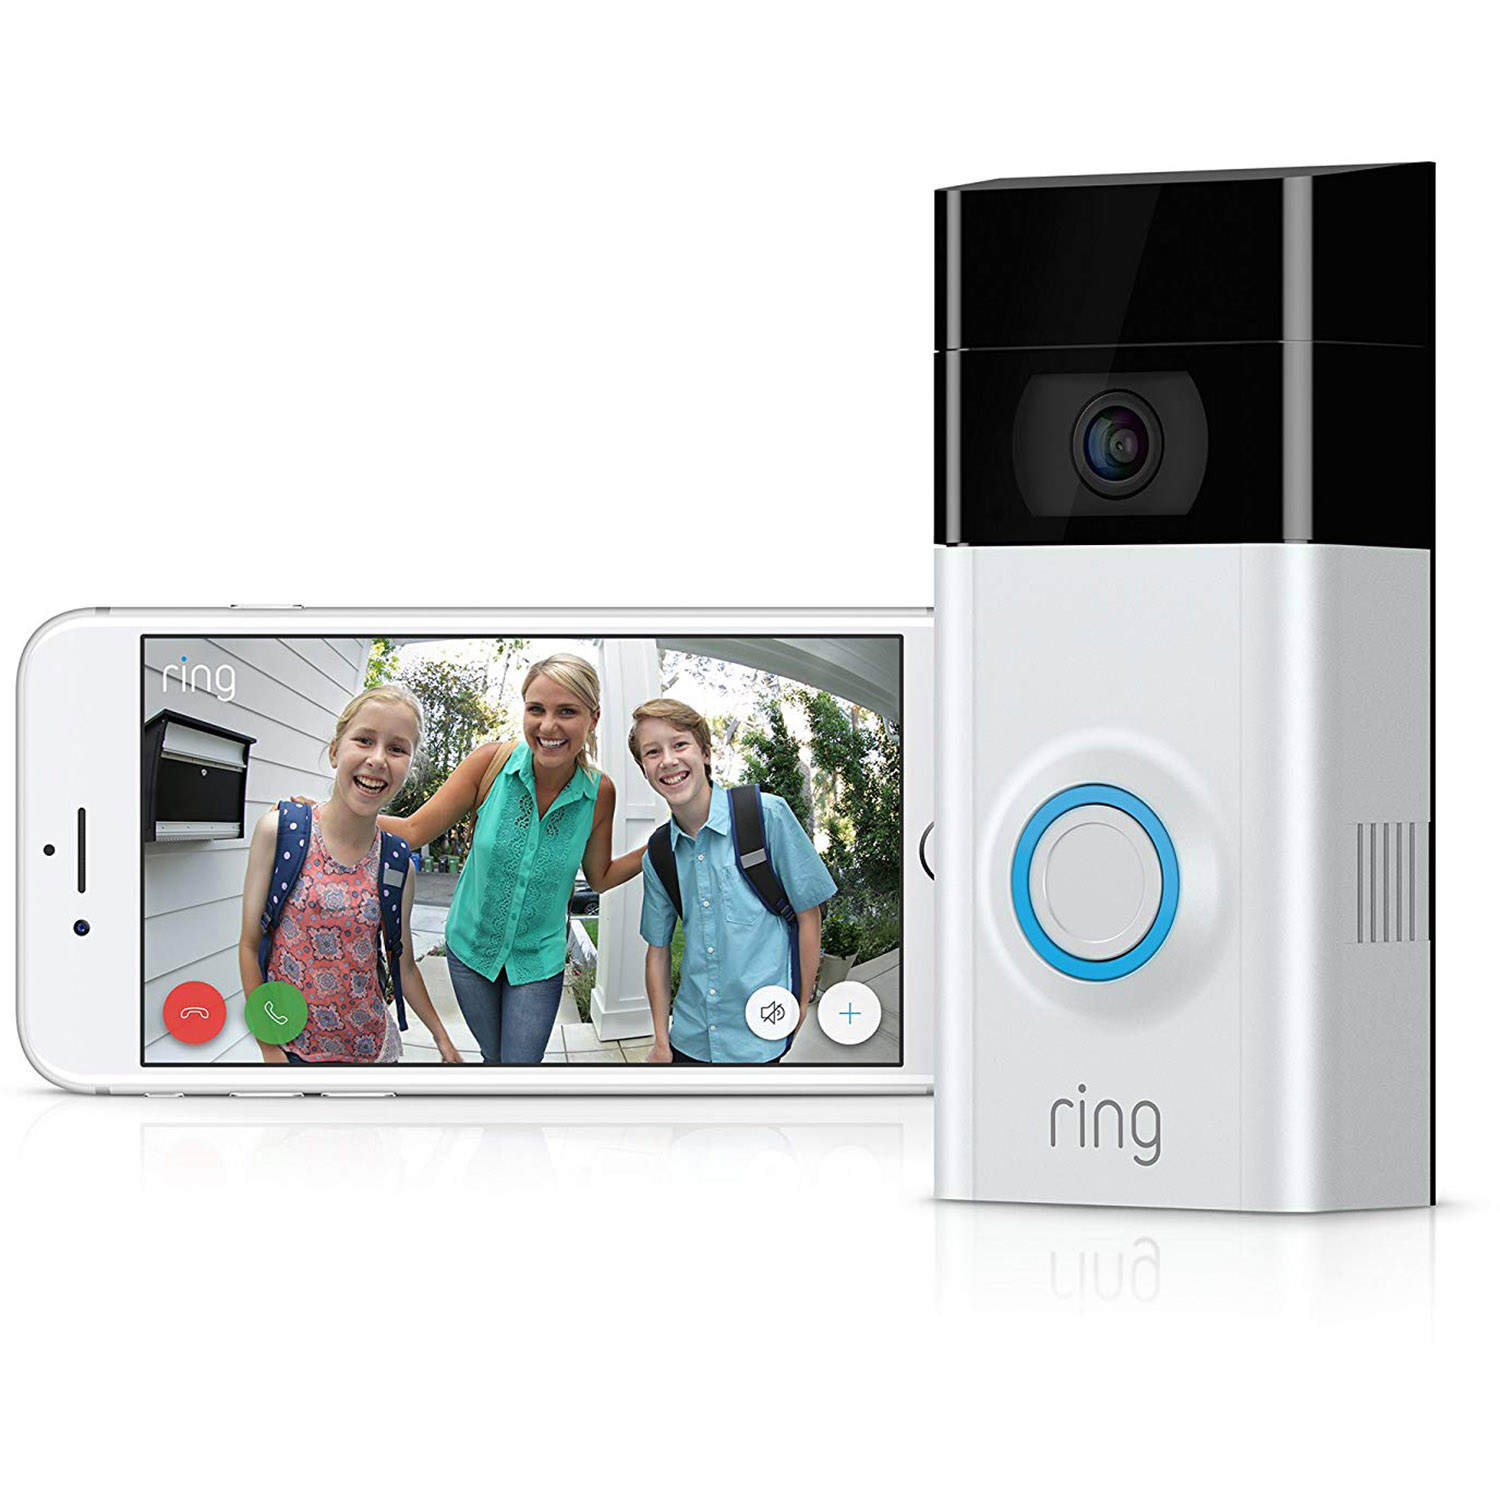 Ring 2 Wi-Fi Enabled Security Video Doorbell, Works with Alexa, Satin Nickel Finish - Includes Free Cleaning Cloth - image 3 of 5